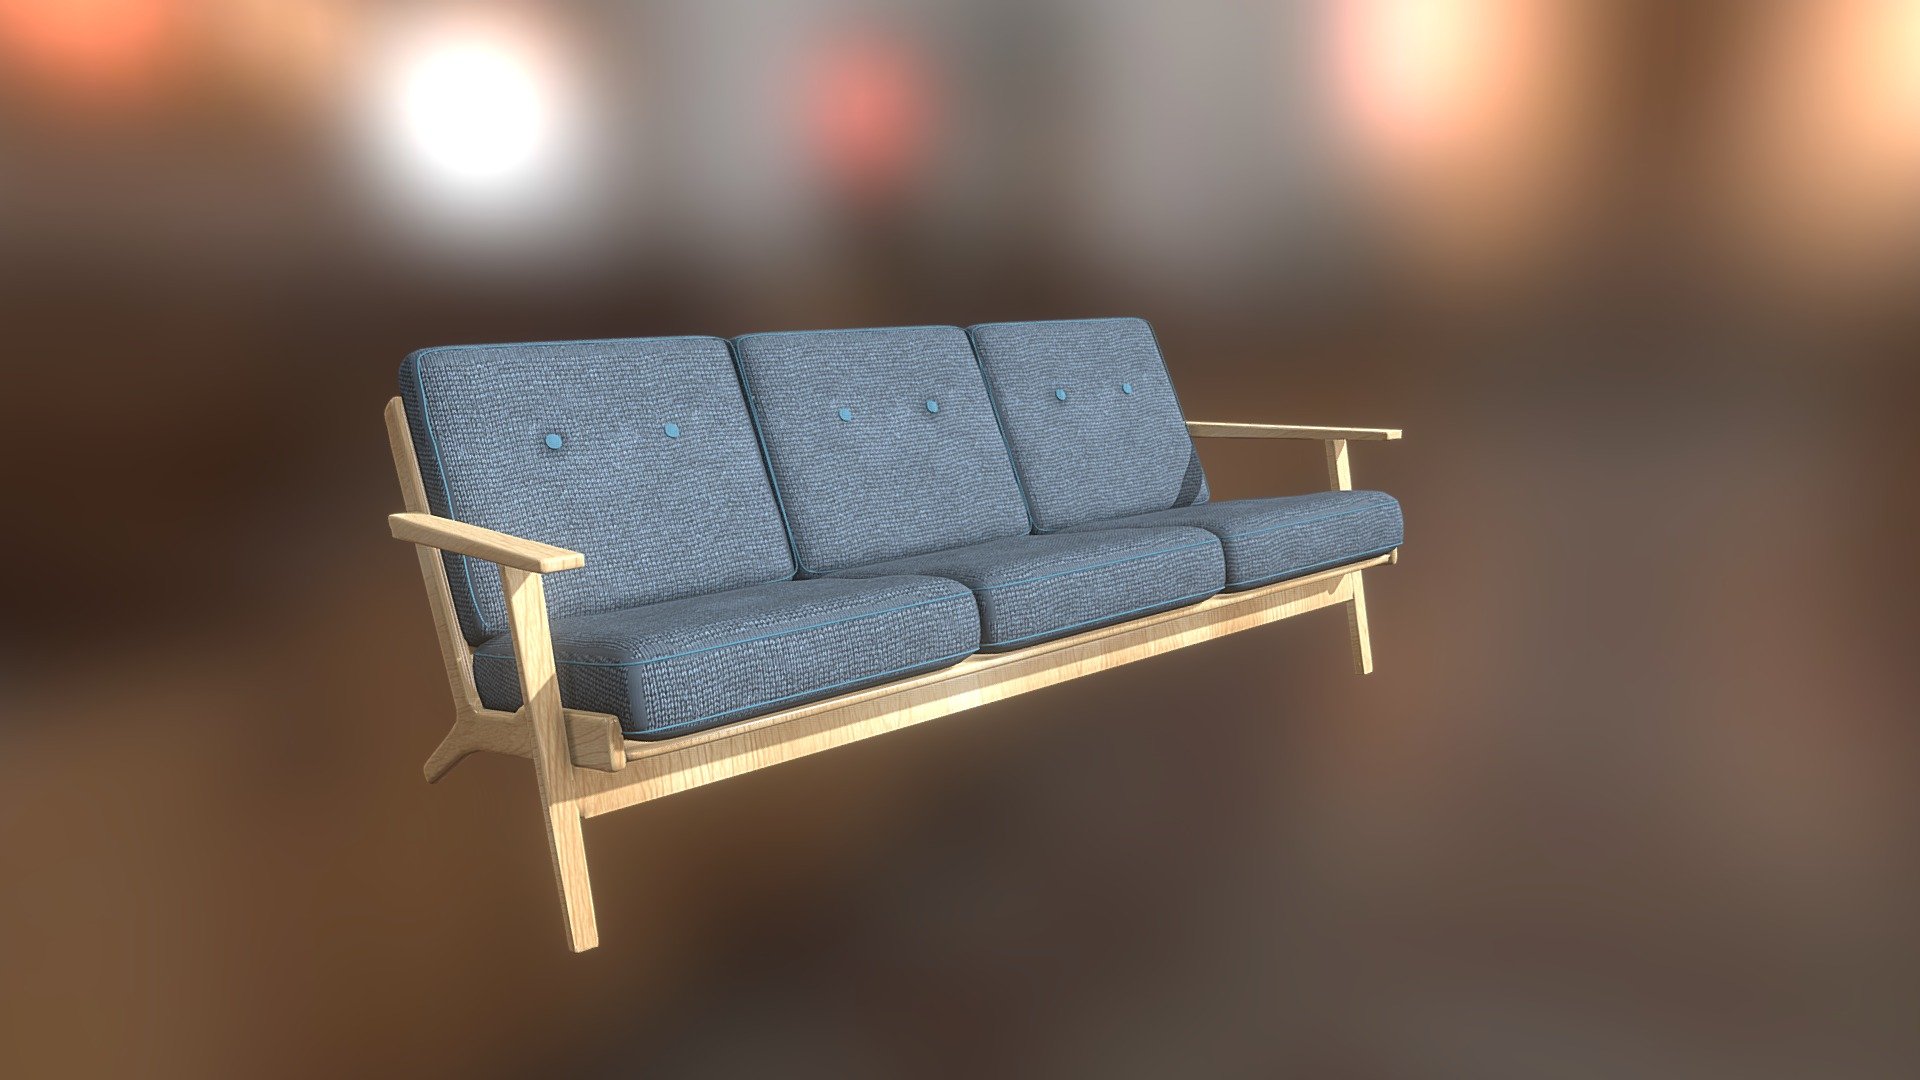 A modernist styled couch from the 60's - Vintage 60's Style Couch - Buy Royalty Free 3D model by veryveig 3d model